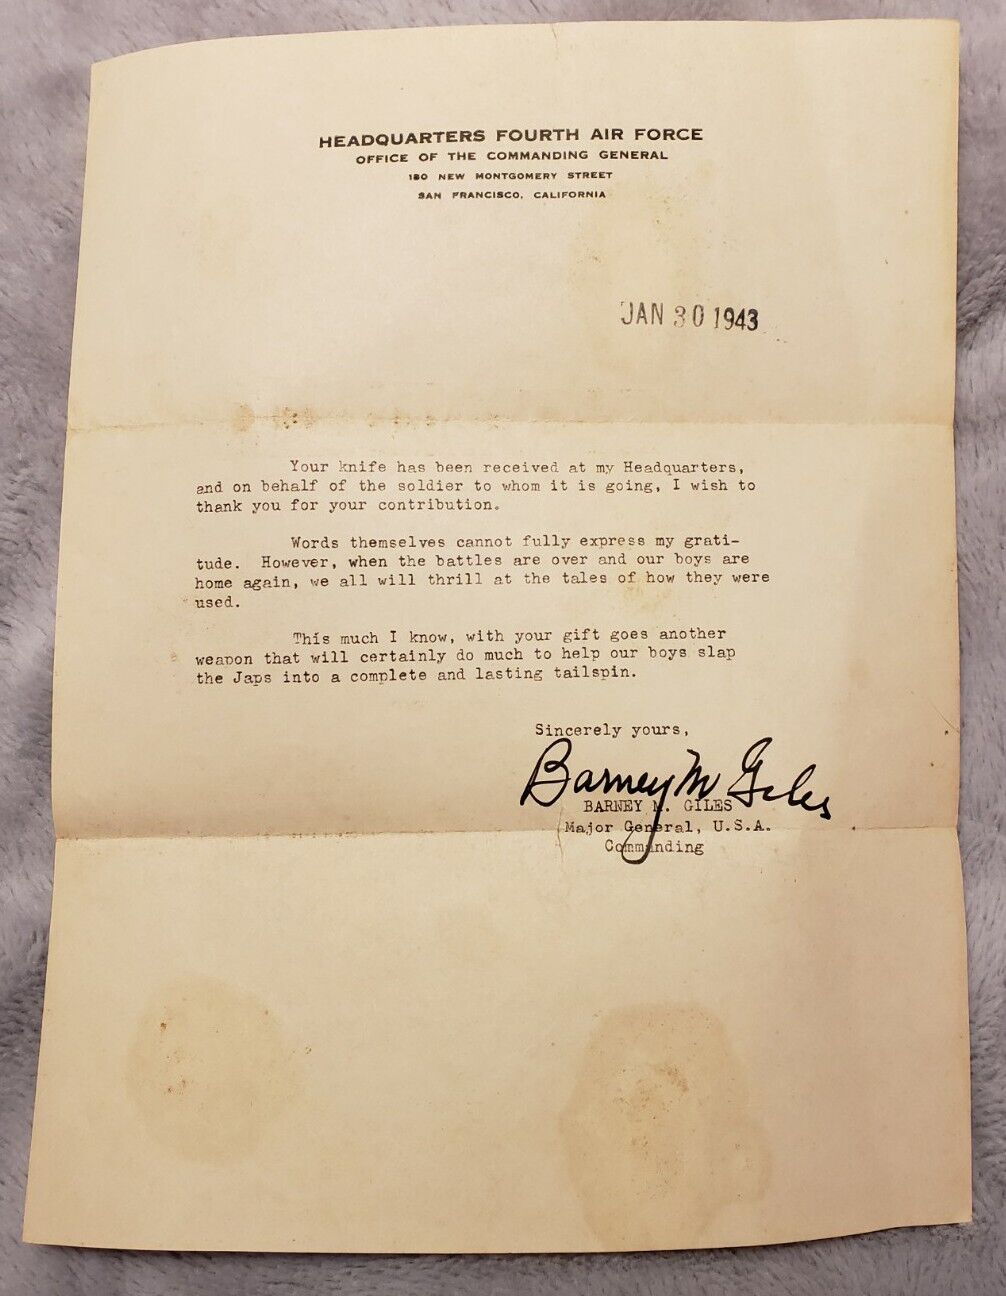 WW2 Letter from Major Gen. Barney M. Giles, Headquarters 4th Air Force, 1943